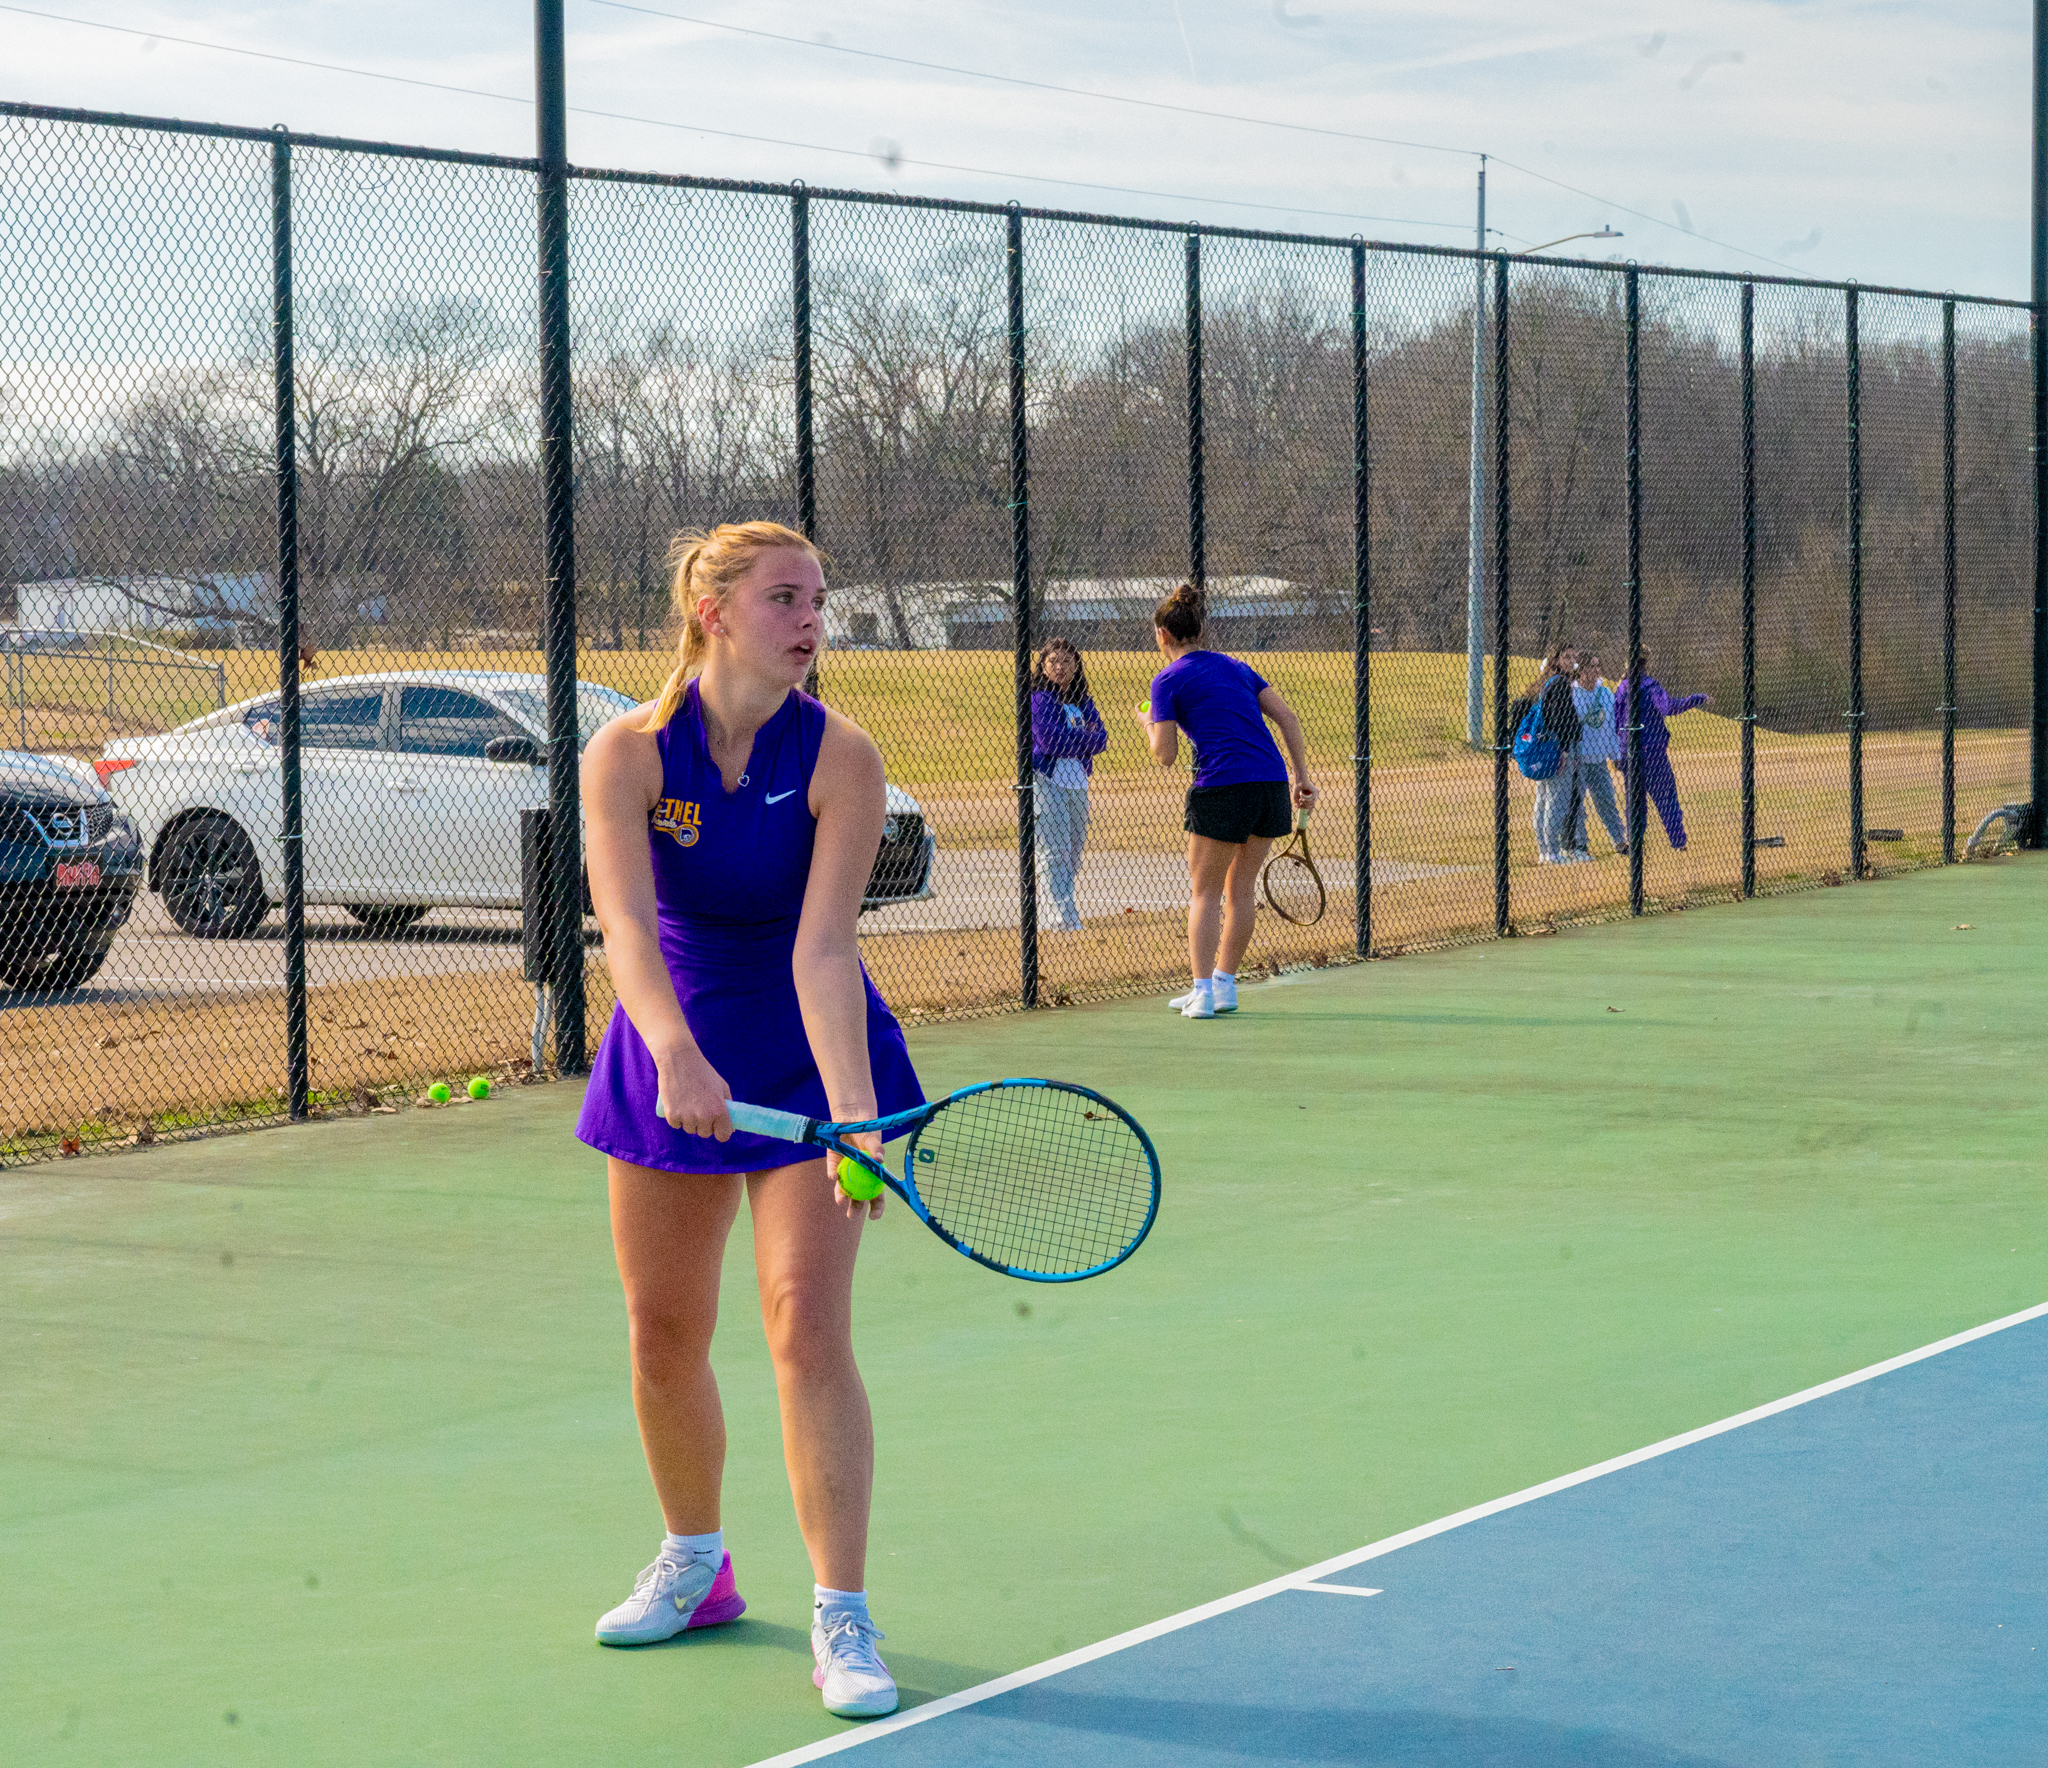 Lady Wildcats Continue to Receive Votes in NAIA Women’s Tennis Coaches’ Top 25 Rating